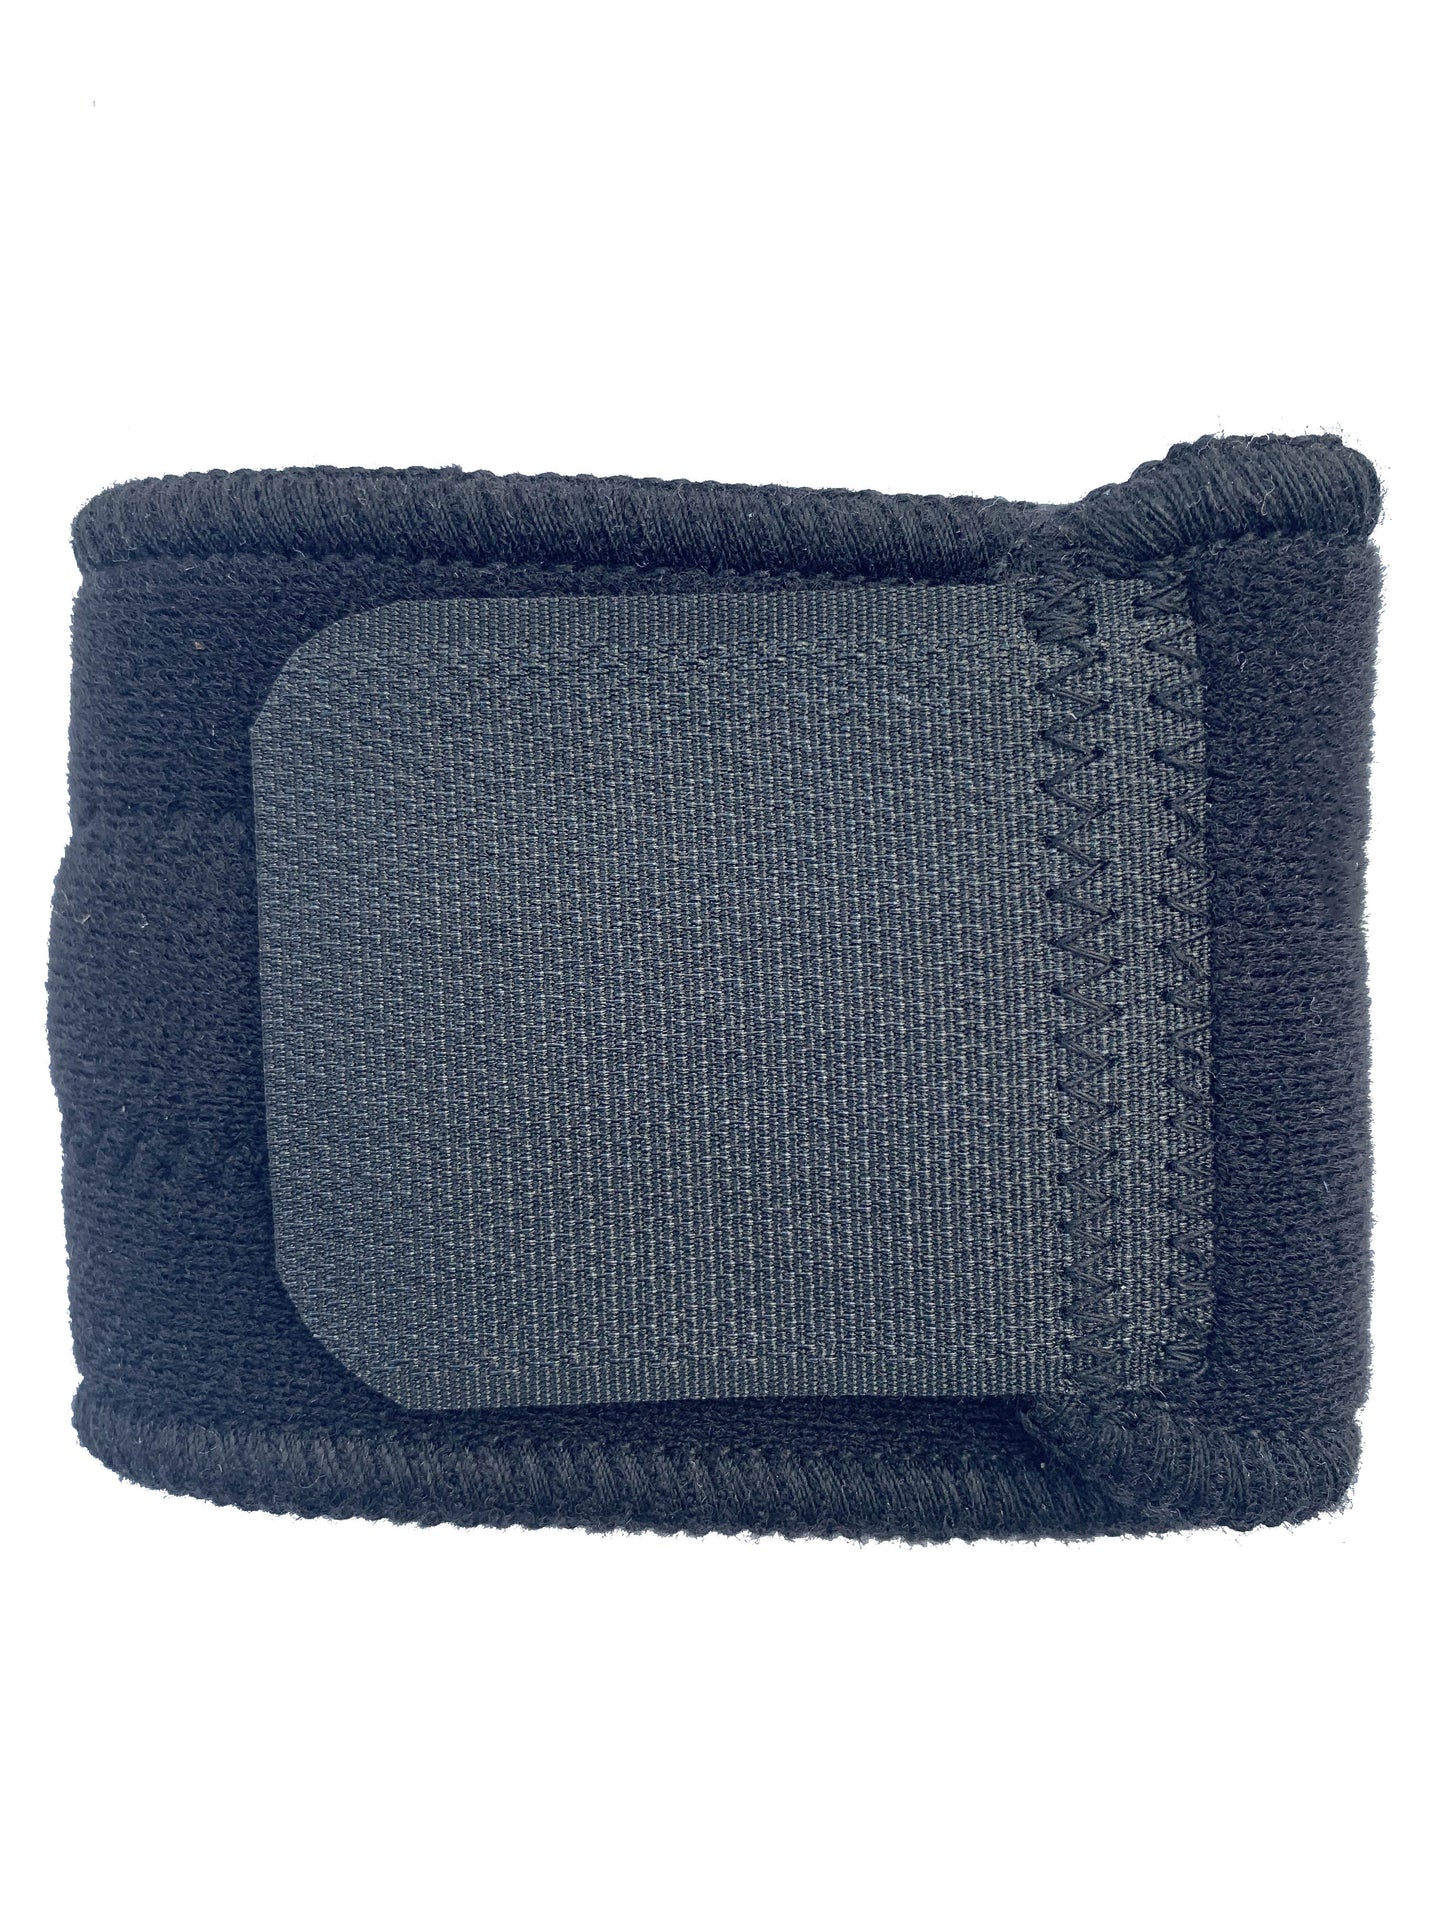 Bio magnetic Wrist support in black folded for travel. 